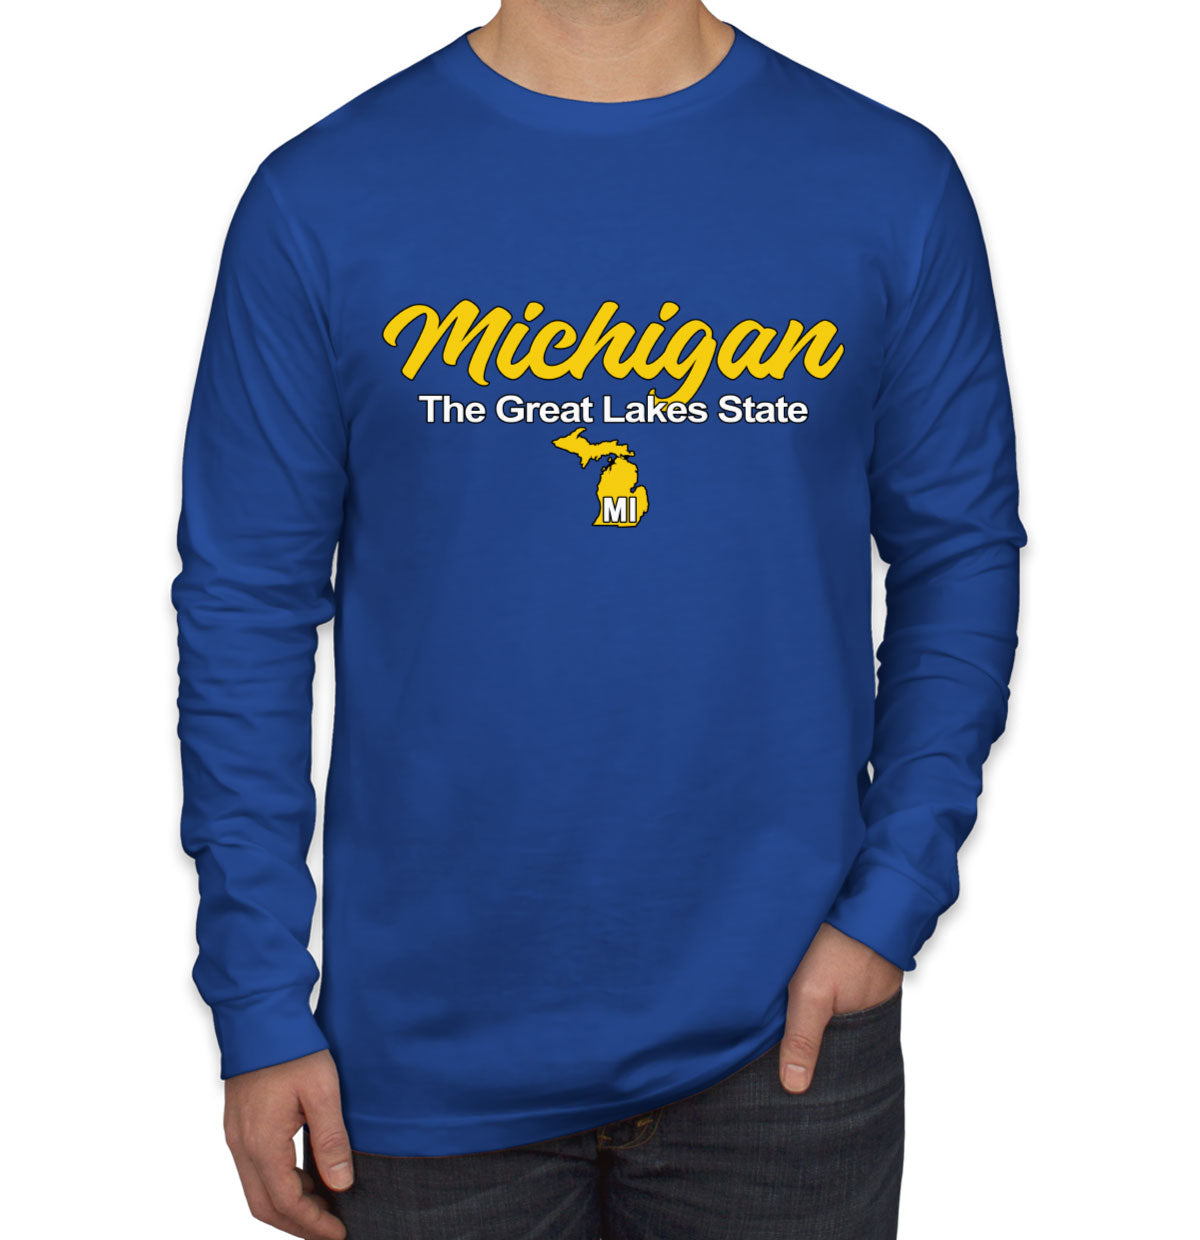 Michigan The Great Lakes State Men's Long Sleeve Shirt